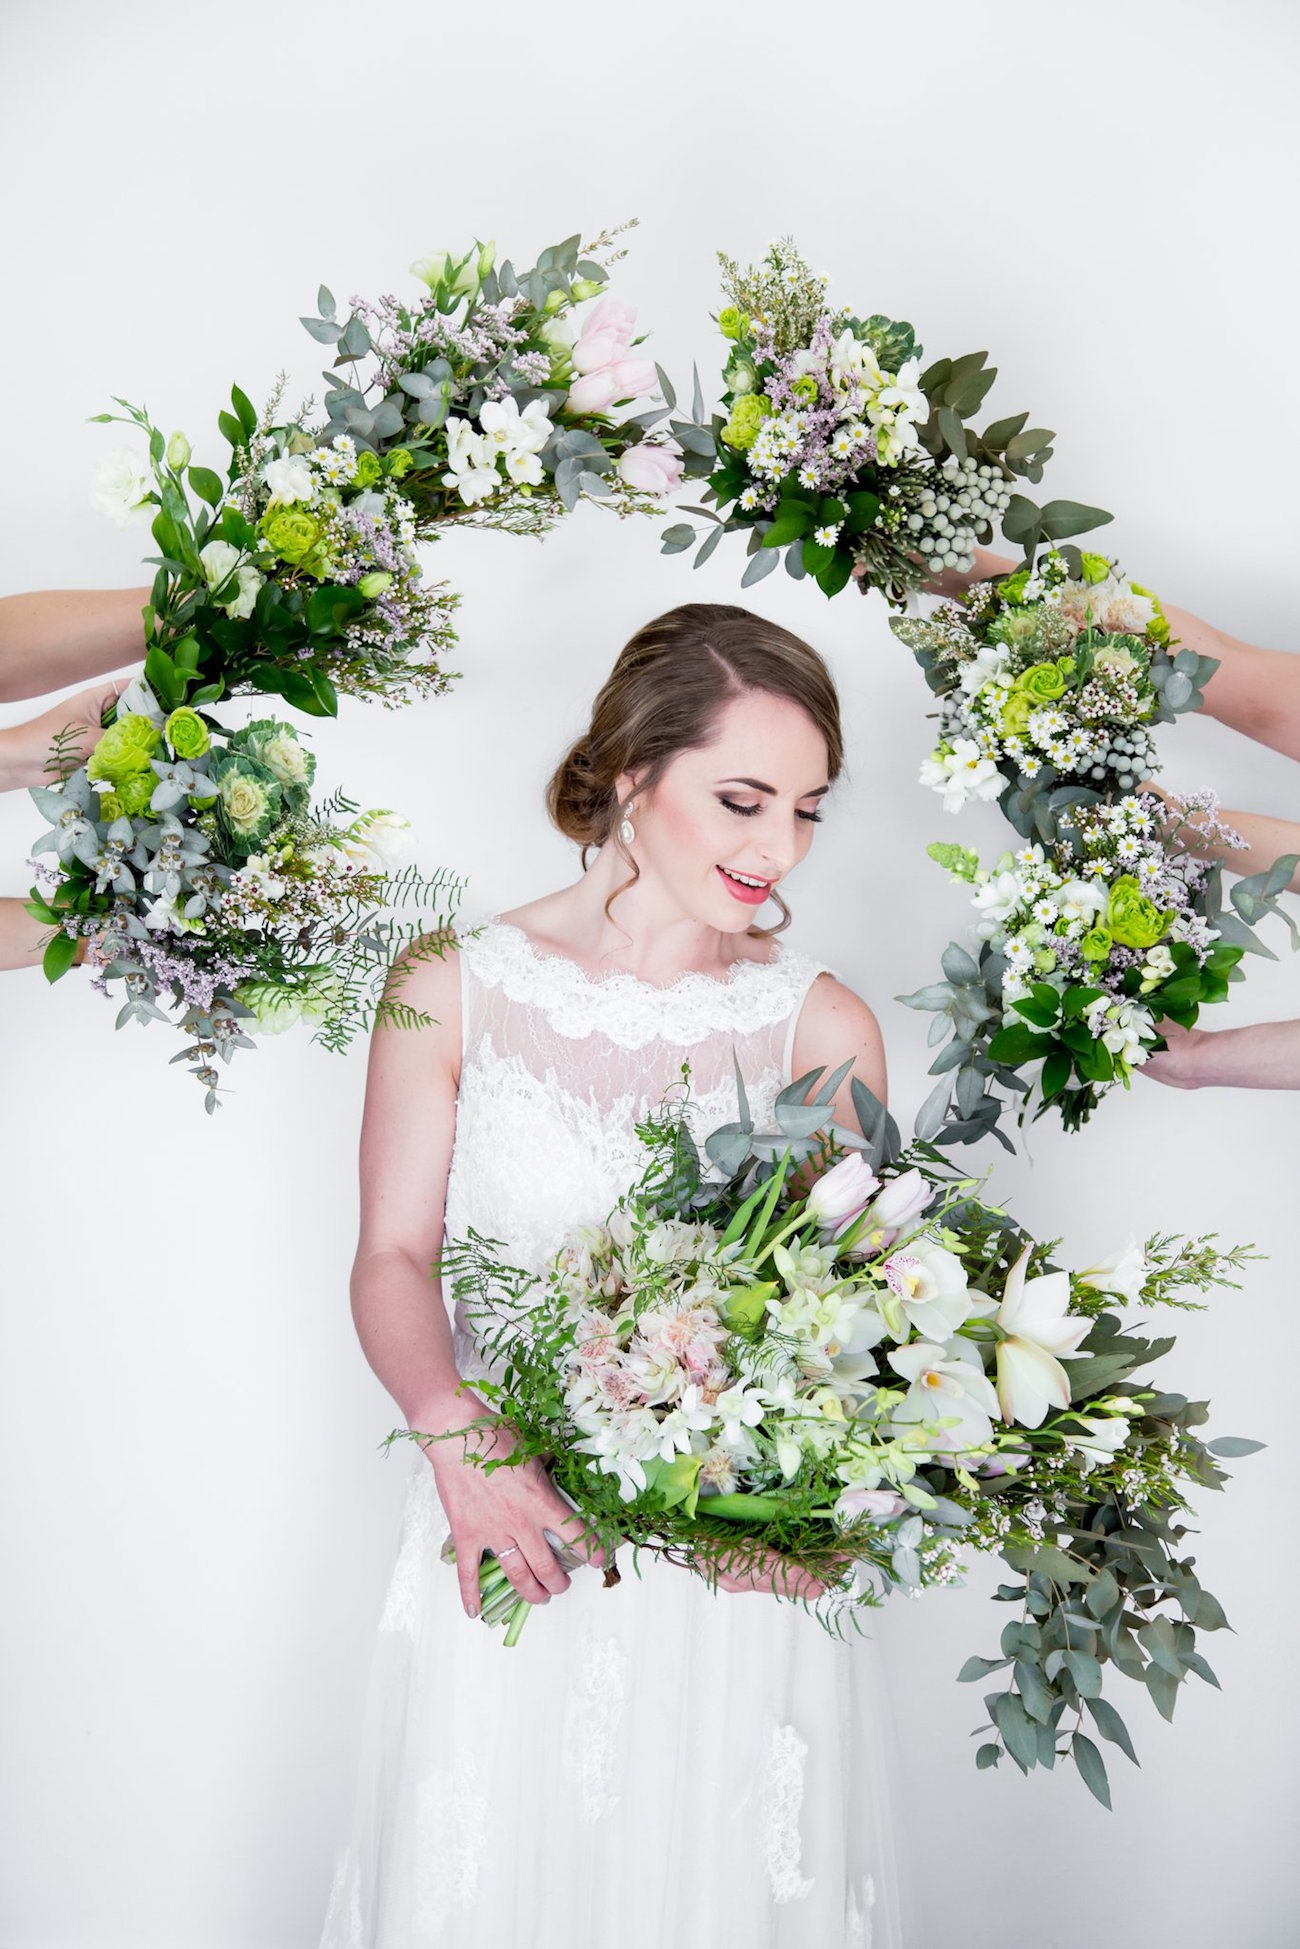 Bride with Greenery Bouquets | Image: JCclick